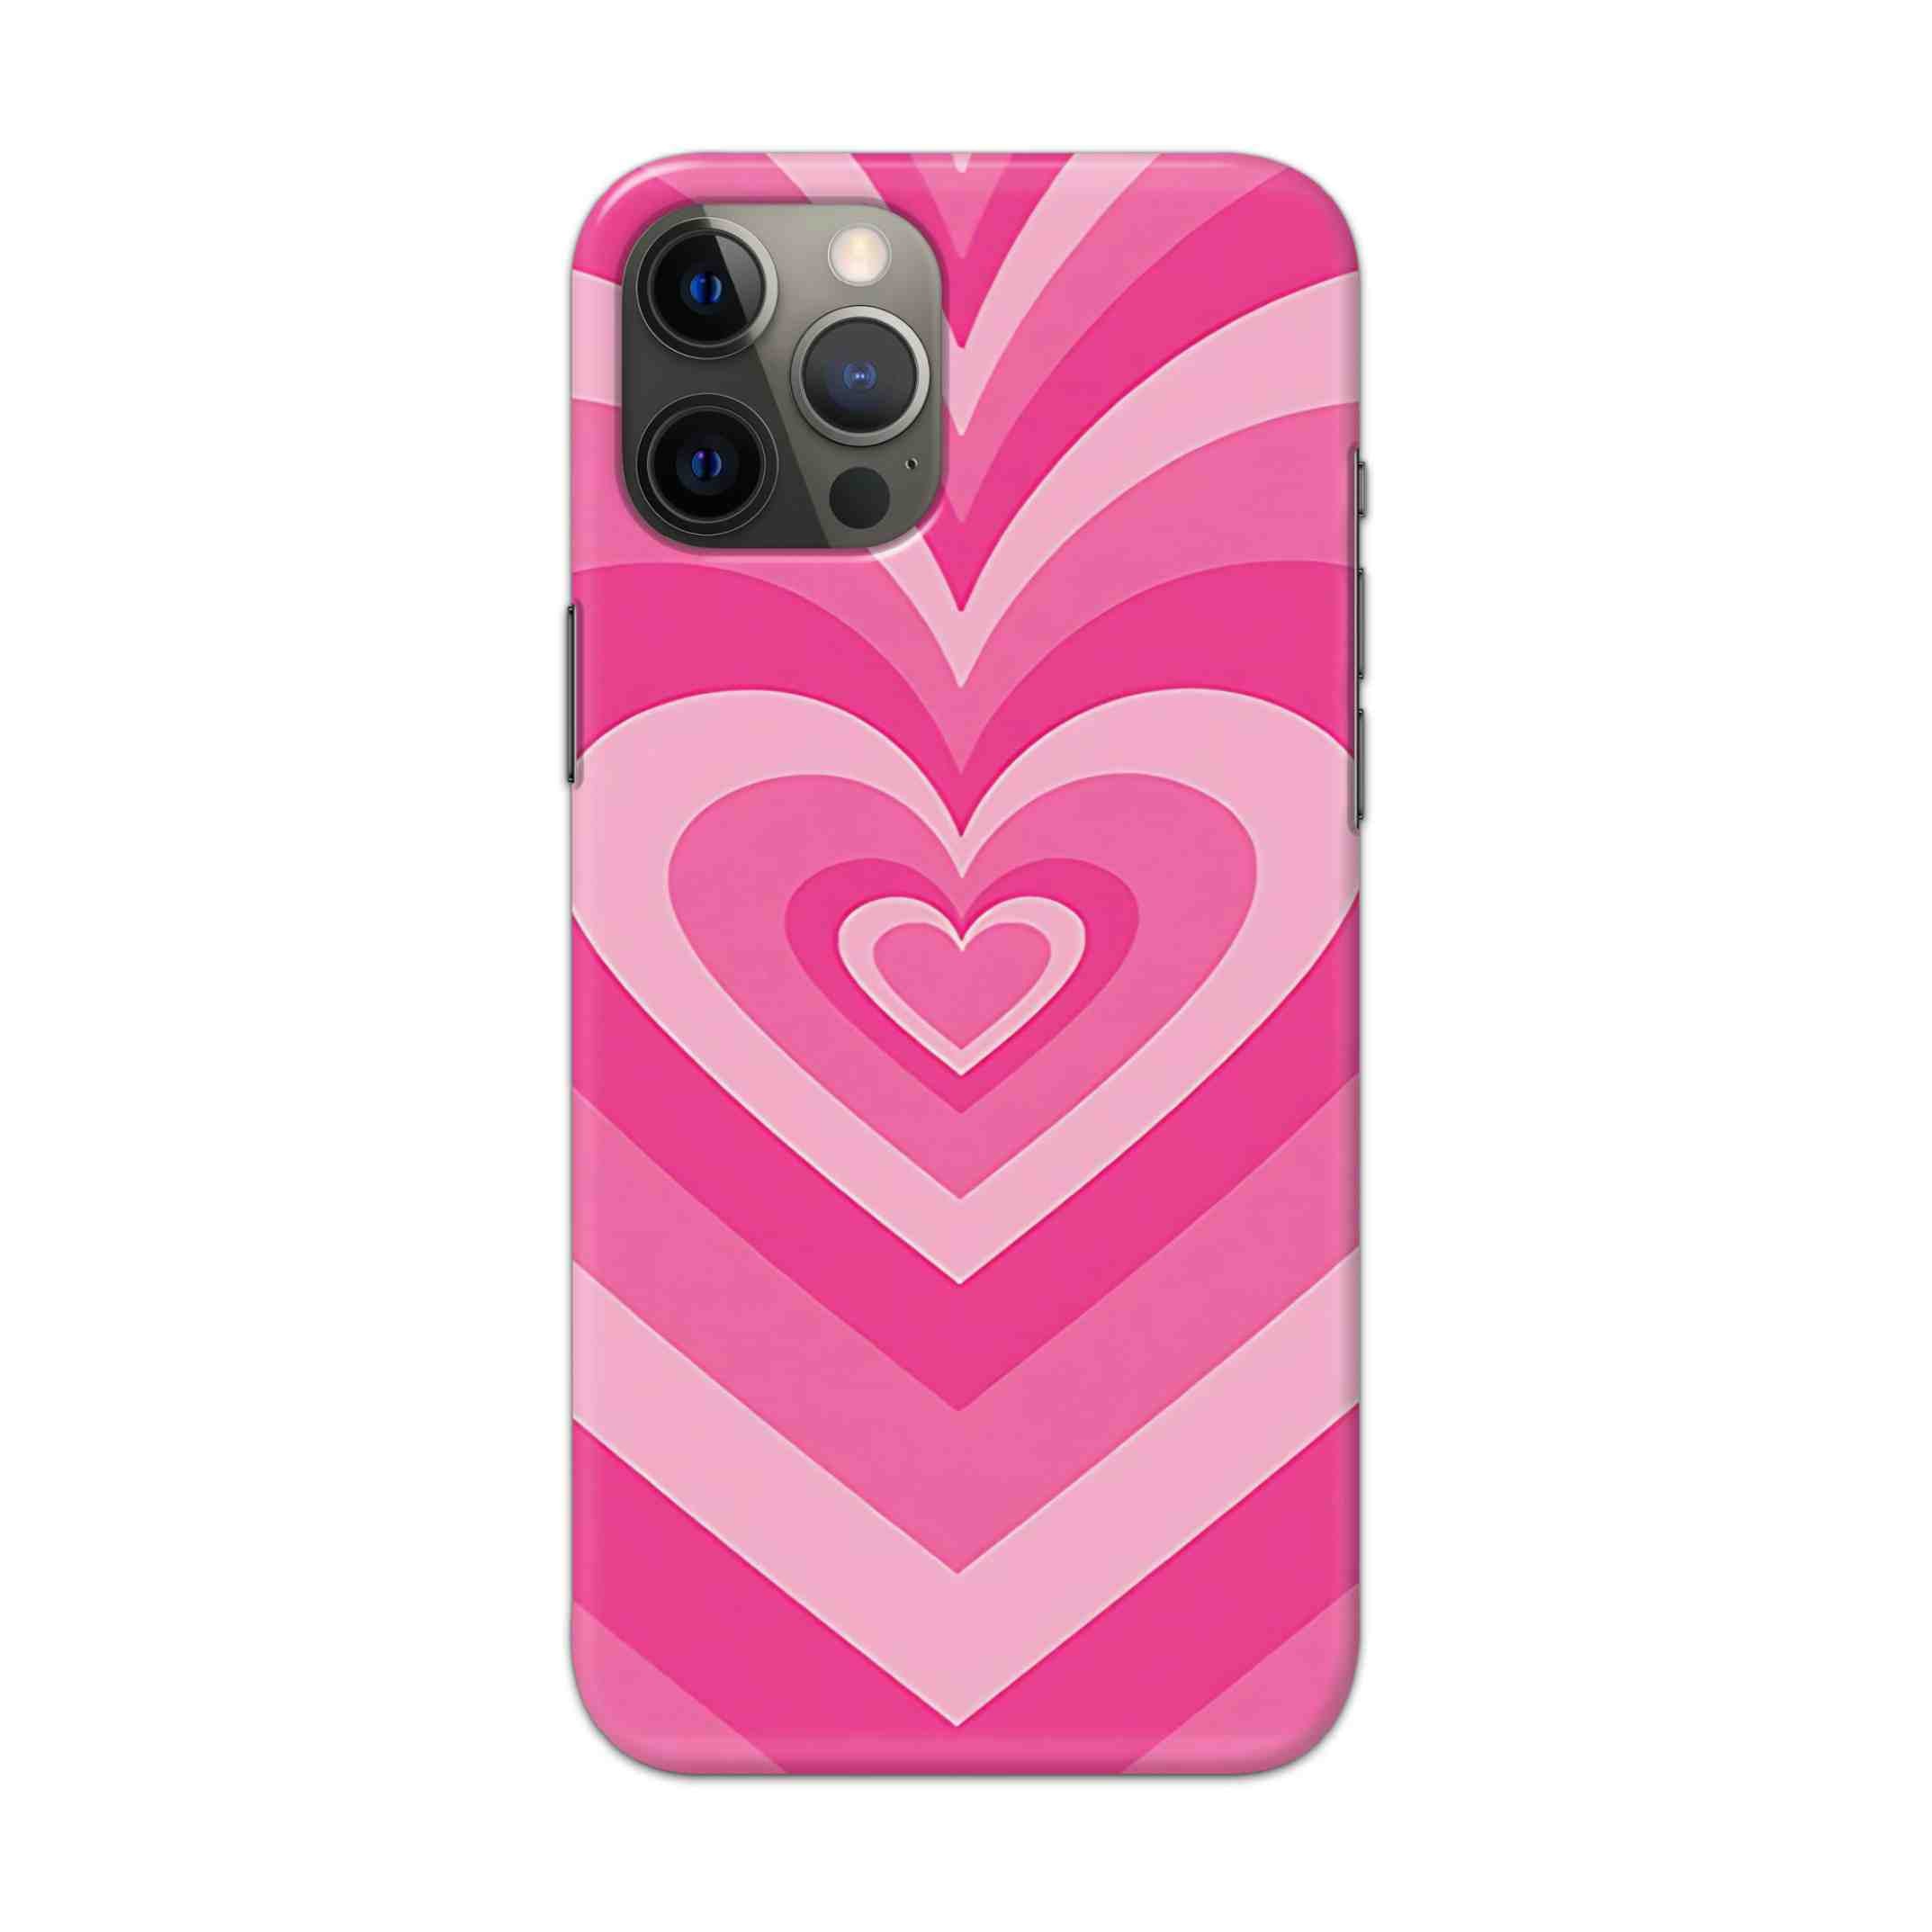 Buy Pink Heart Hard Back Mobile Phone Case Cover For Apple iPhone 12 pro Online